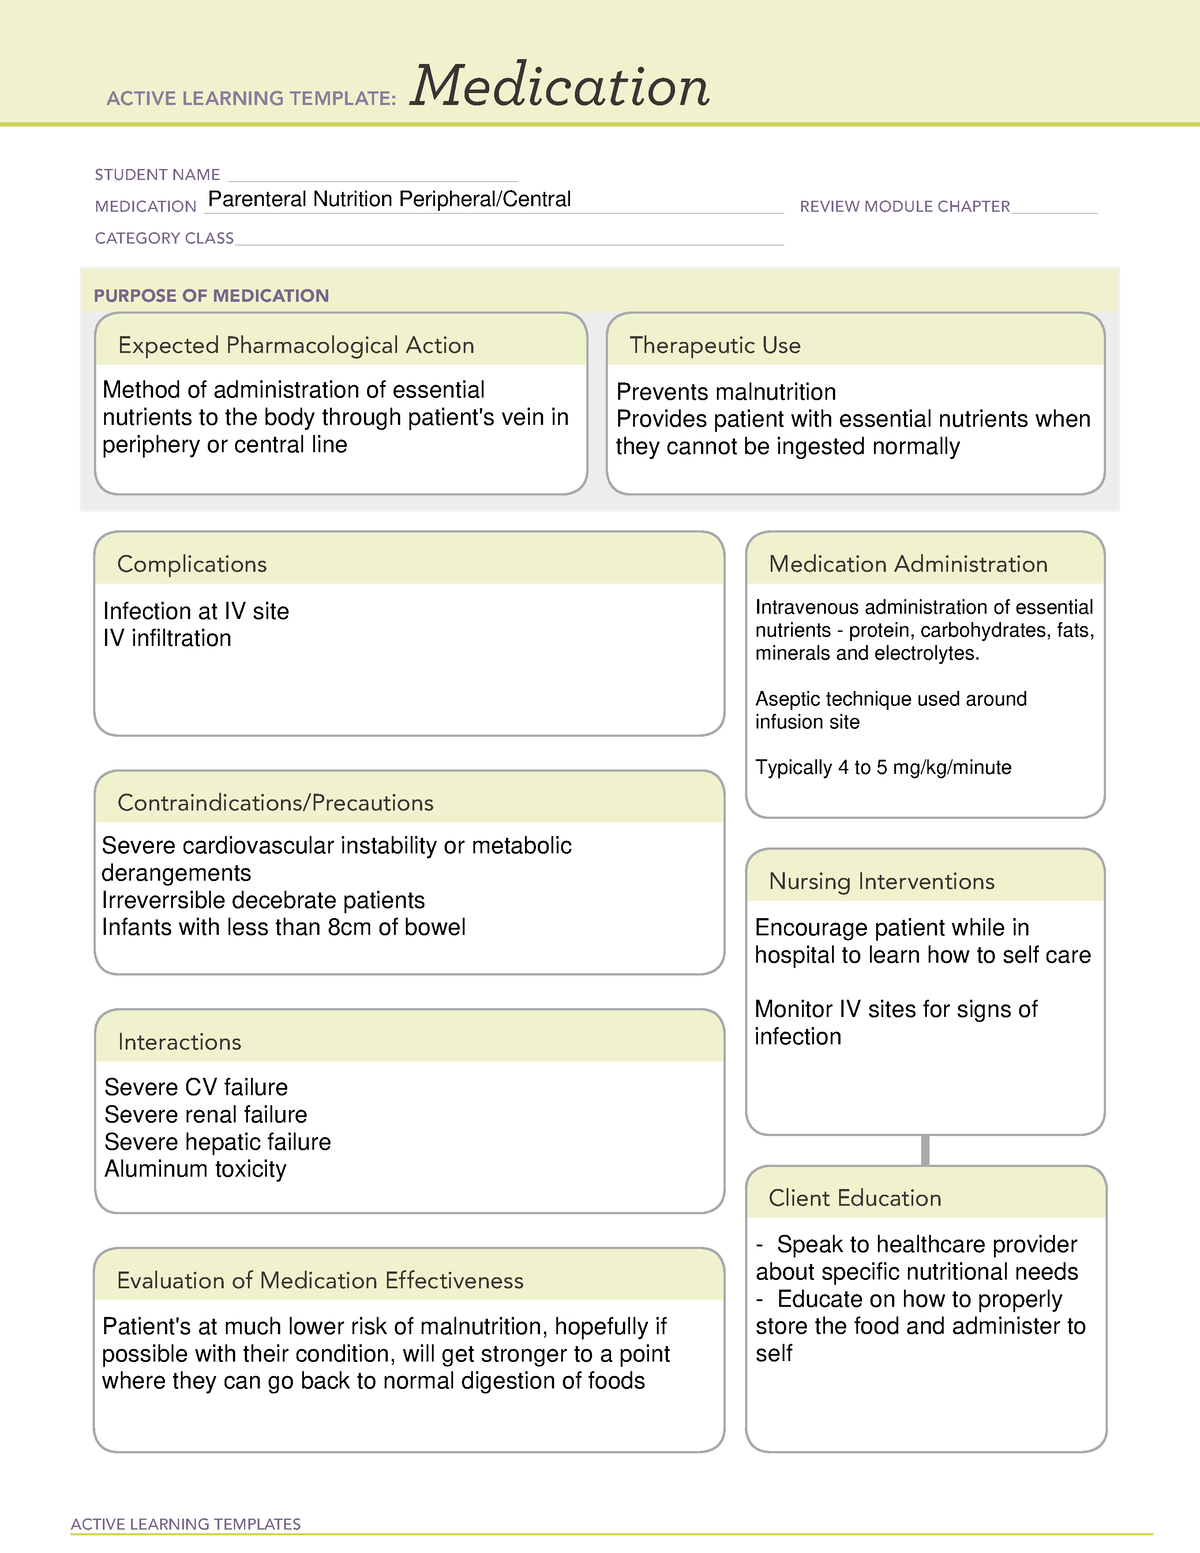 Parenteral Nutrition Med Template - ACTIVE LEARNING TEMPLATES ...